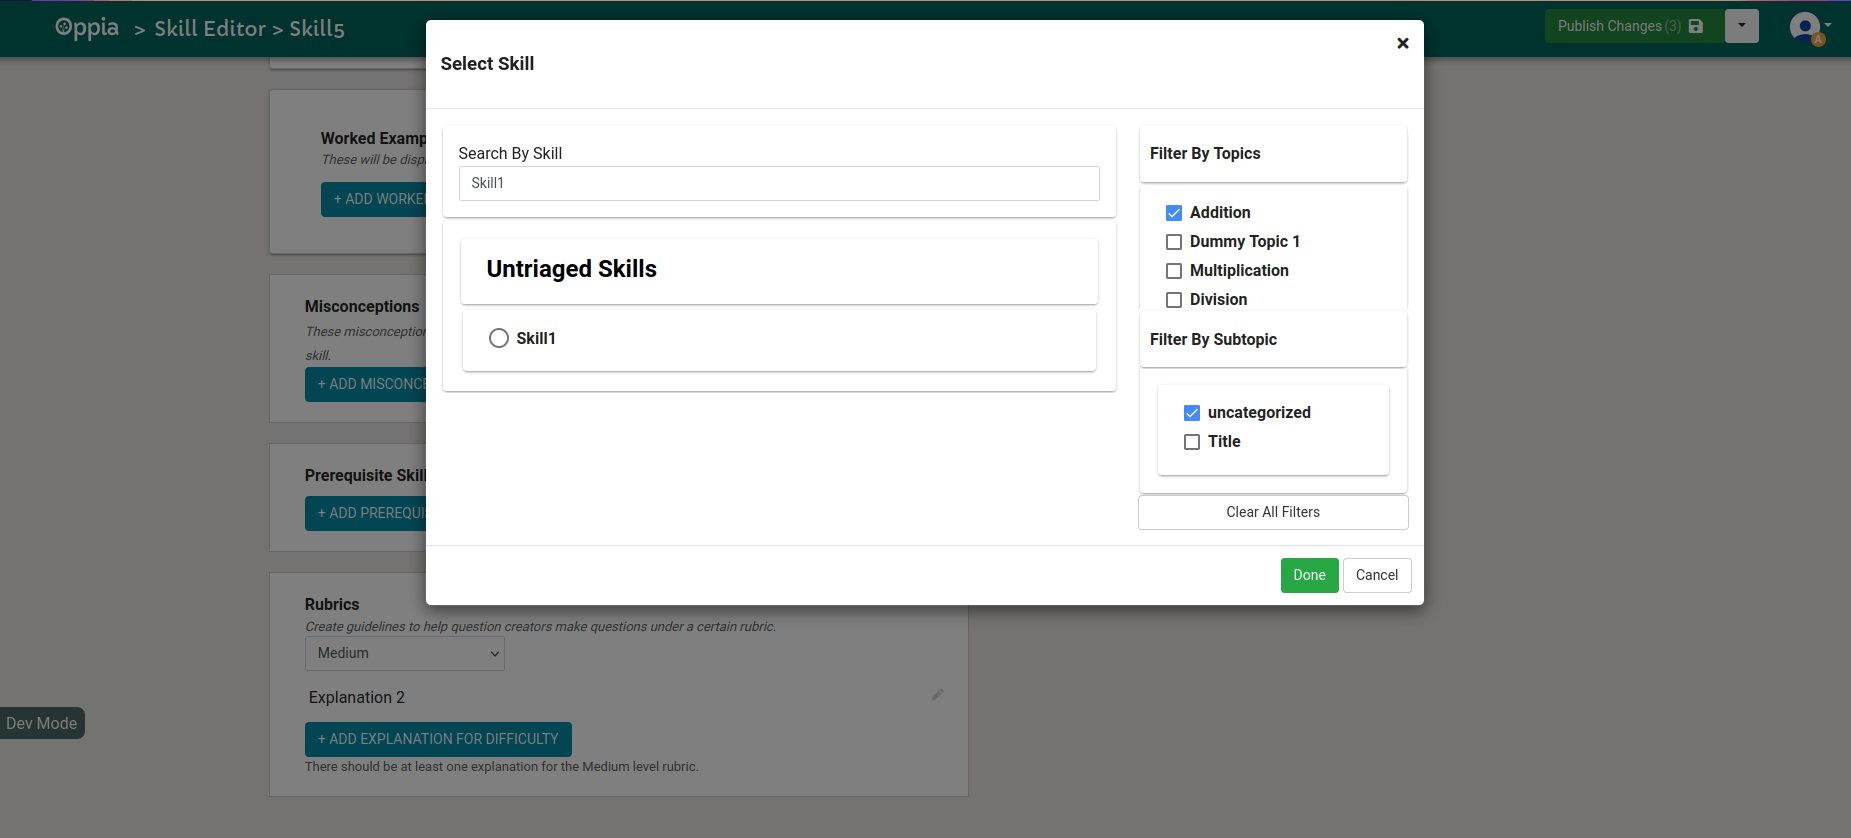 Screenshot of pre-requisite skill section